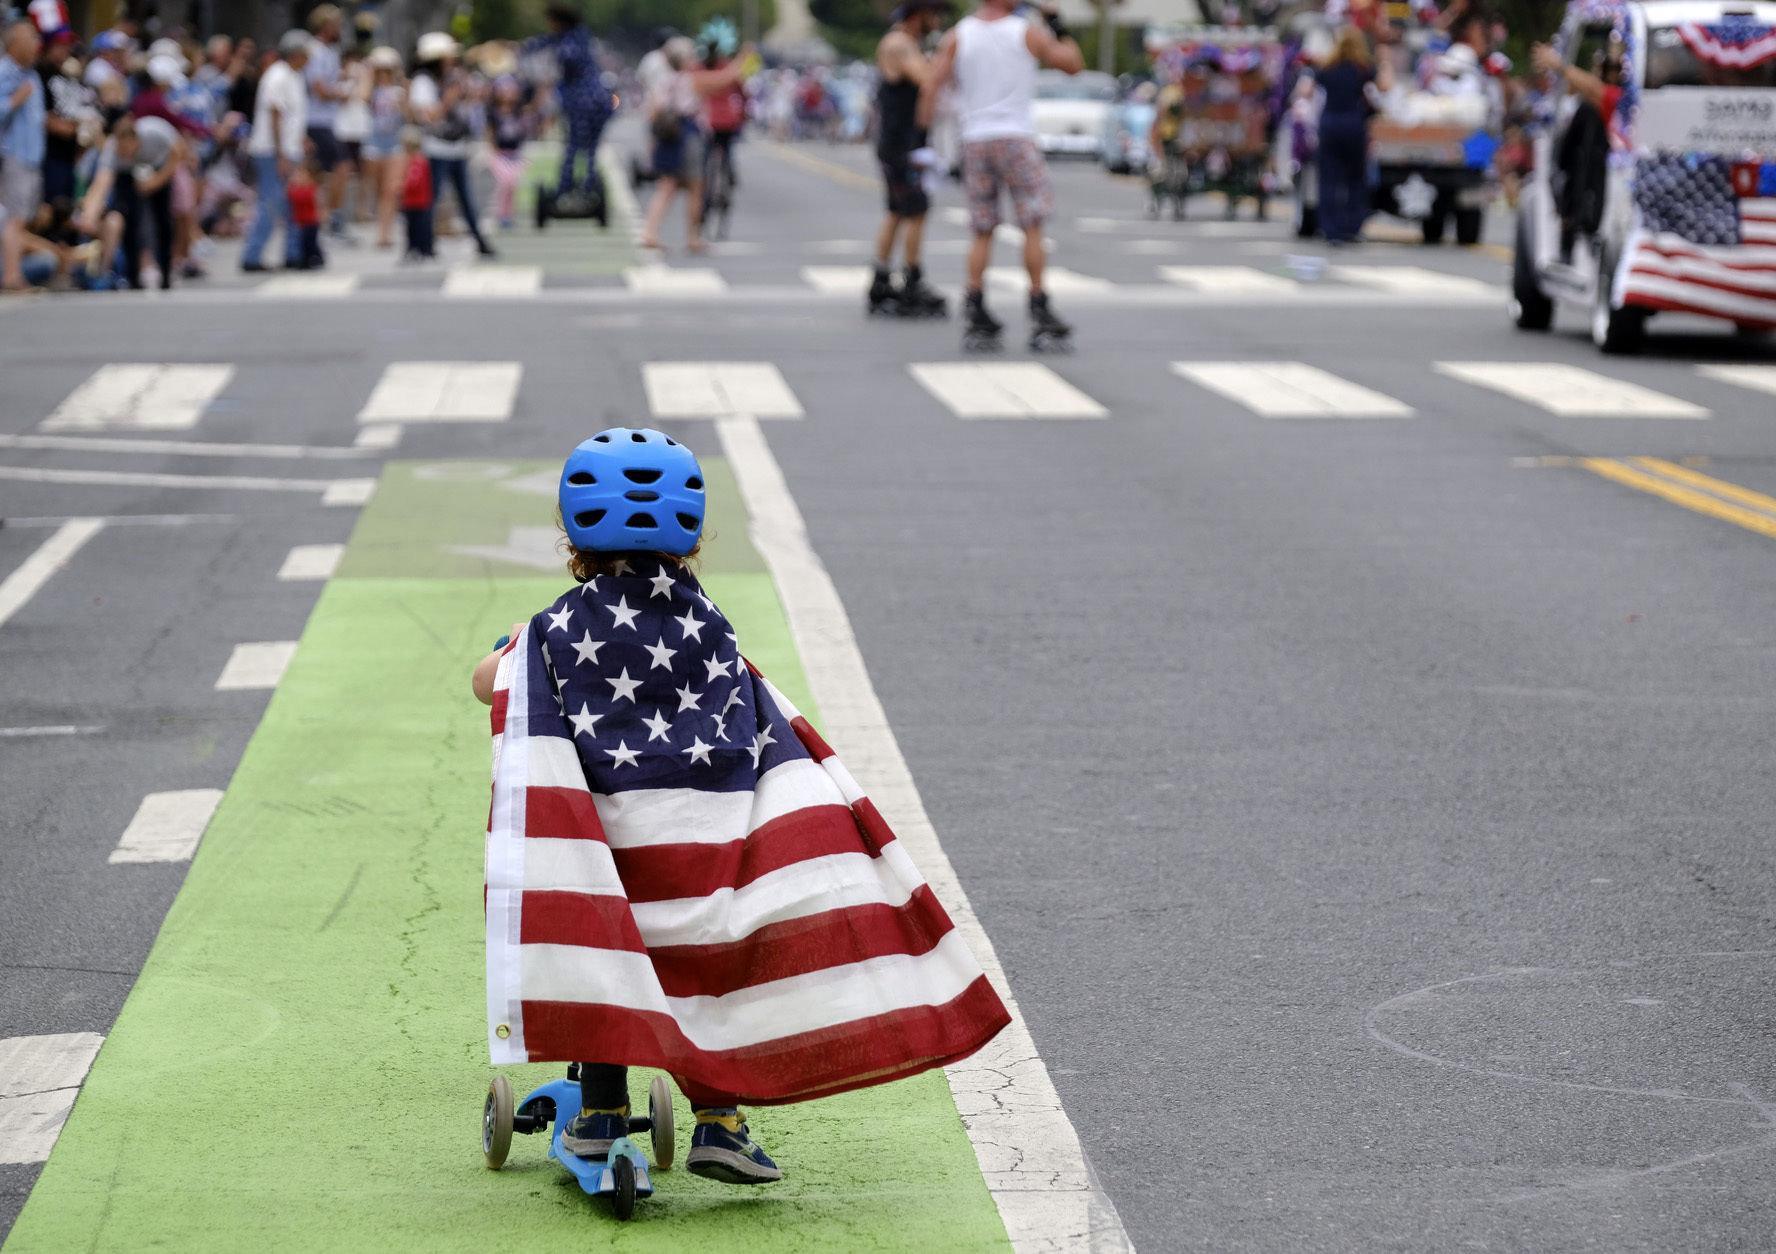 Two and a half year old Zacky Kaplan rides his scooter while draped in the American flag as he makes his way along the parade route during the Santa Monica Fourth of July Parade on Thursday, July 4, 2019 in Santa Monica, Calif. (AP Photo/Richard Vogel)